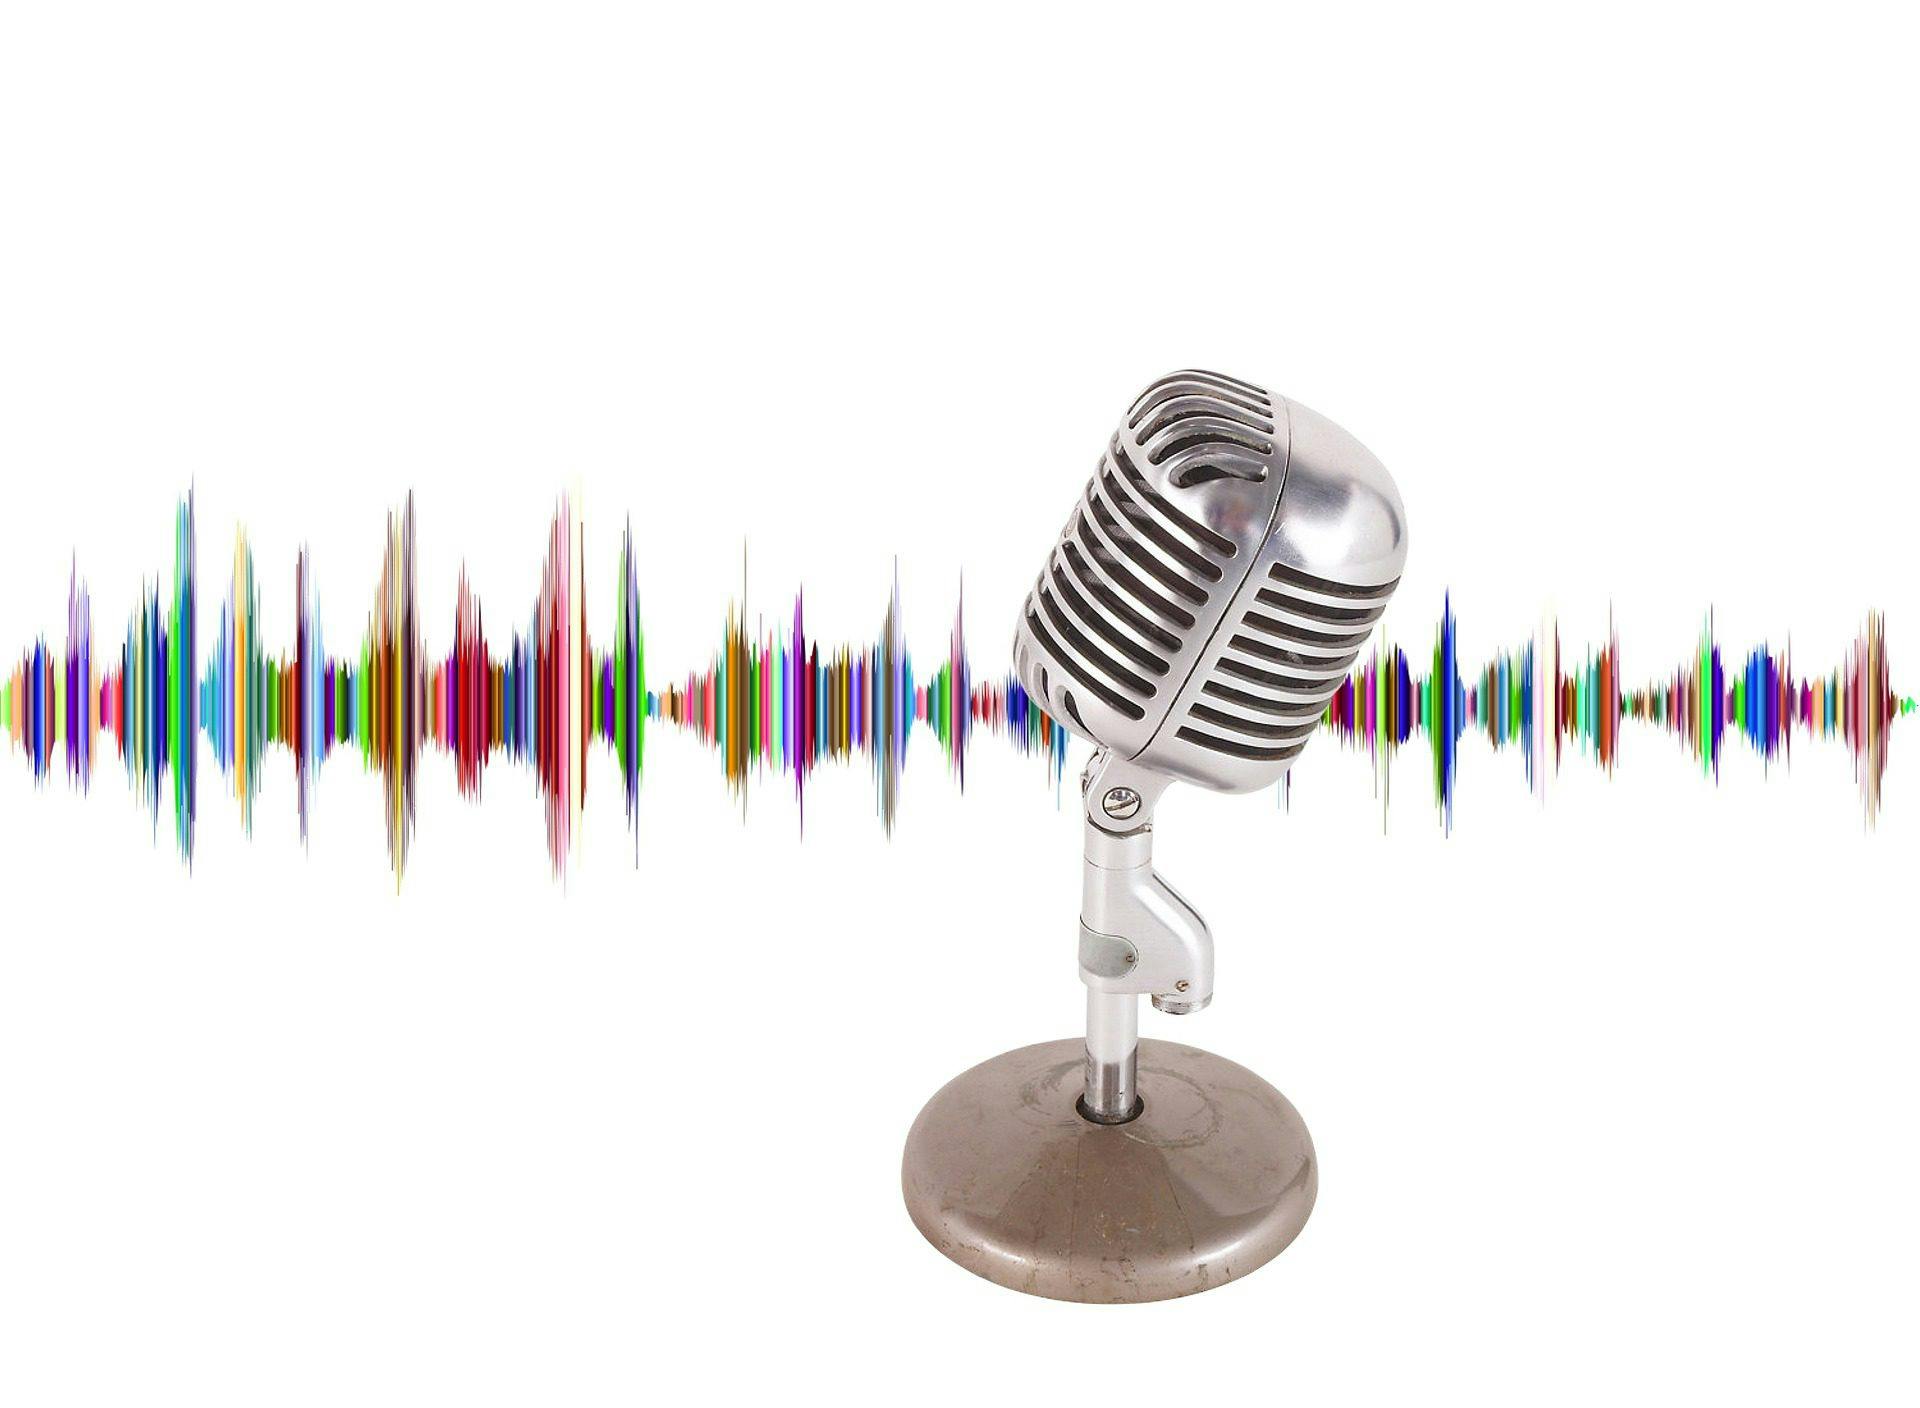 silver microphone in front of colorful sound waves